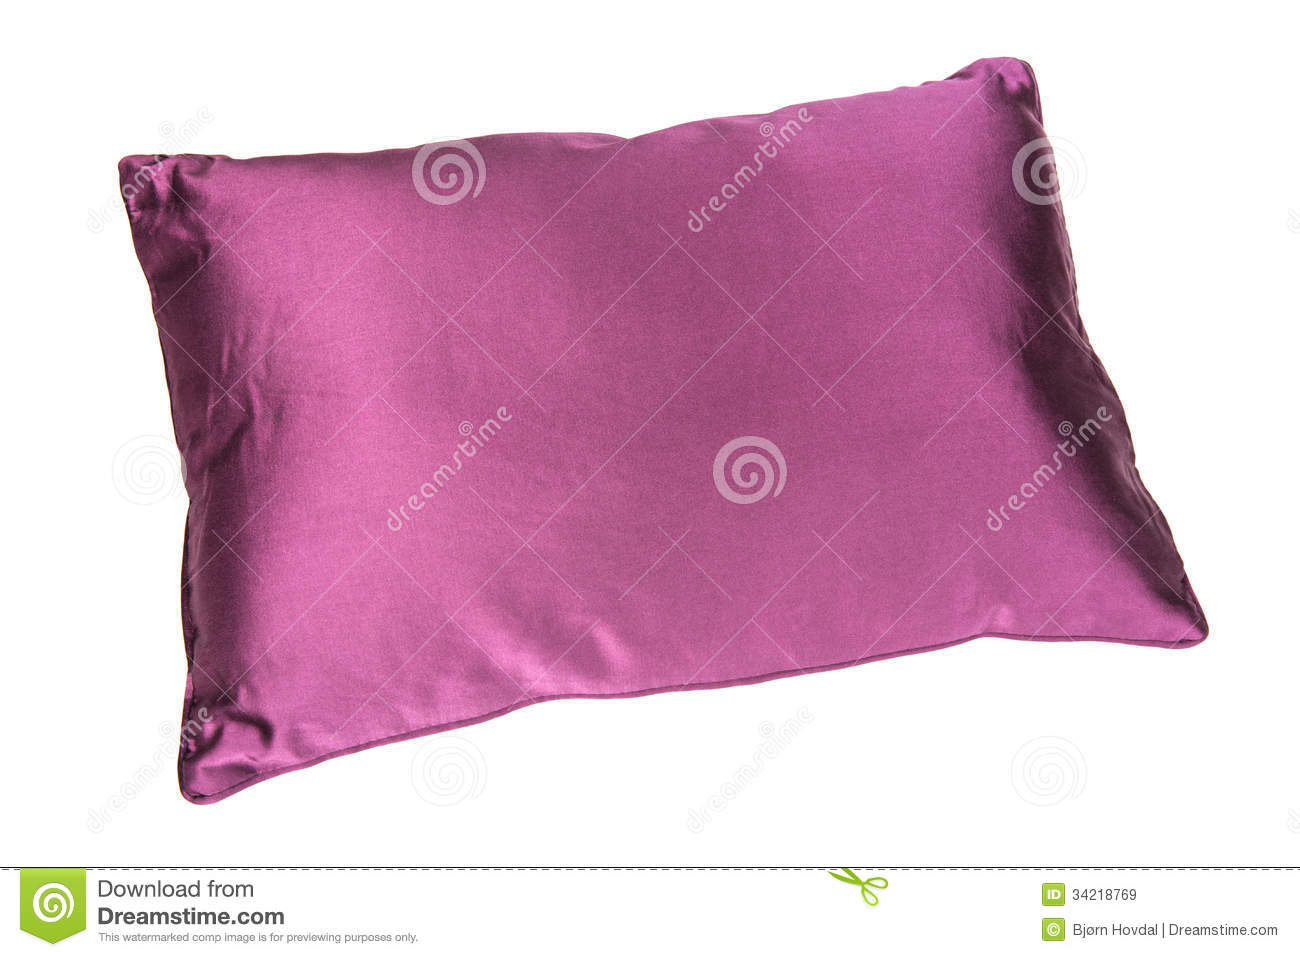 Purple Pillow Isolated On A White Background Mr No Pr No 2 587 4